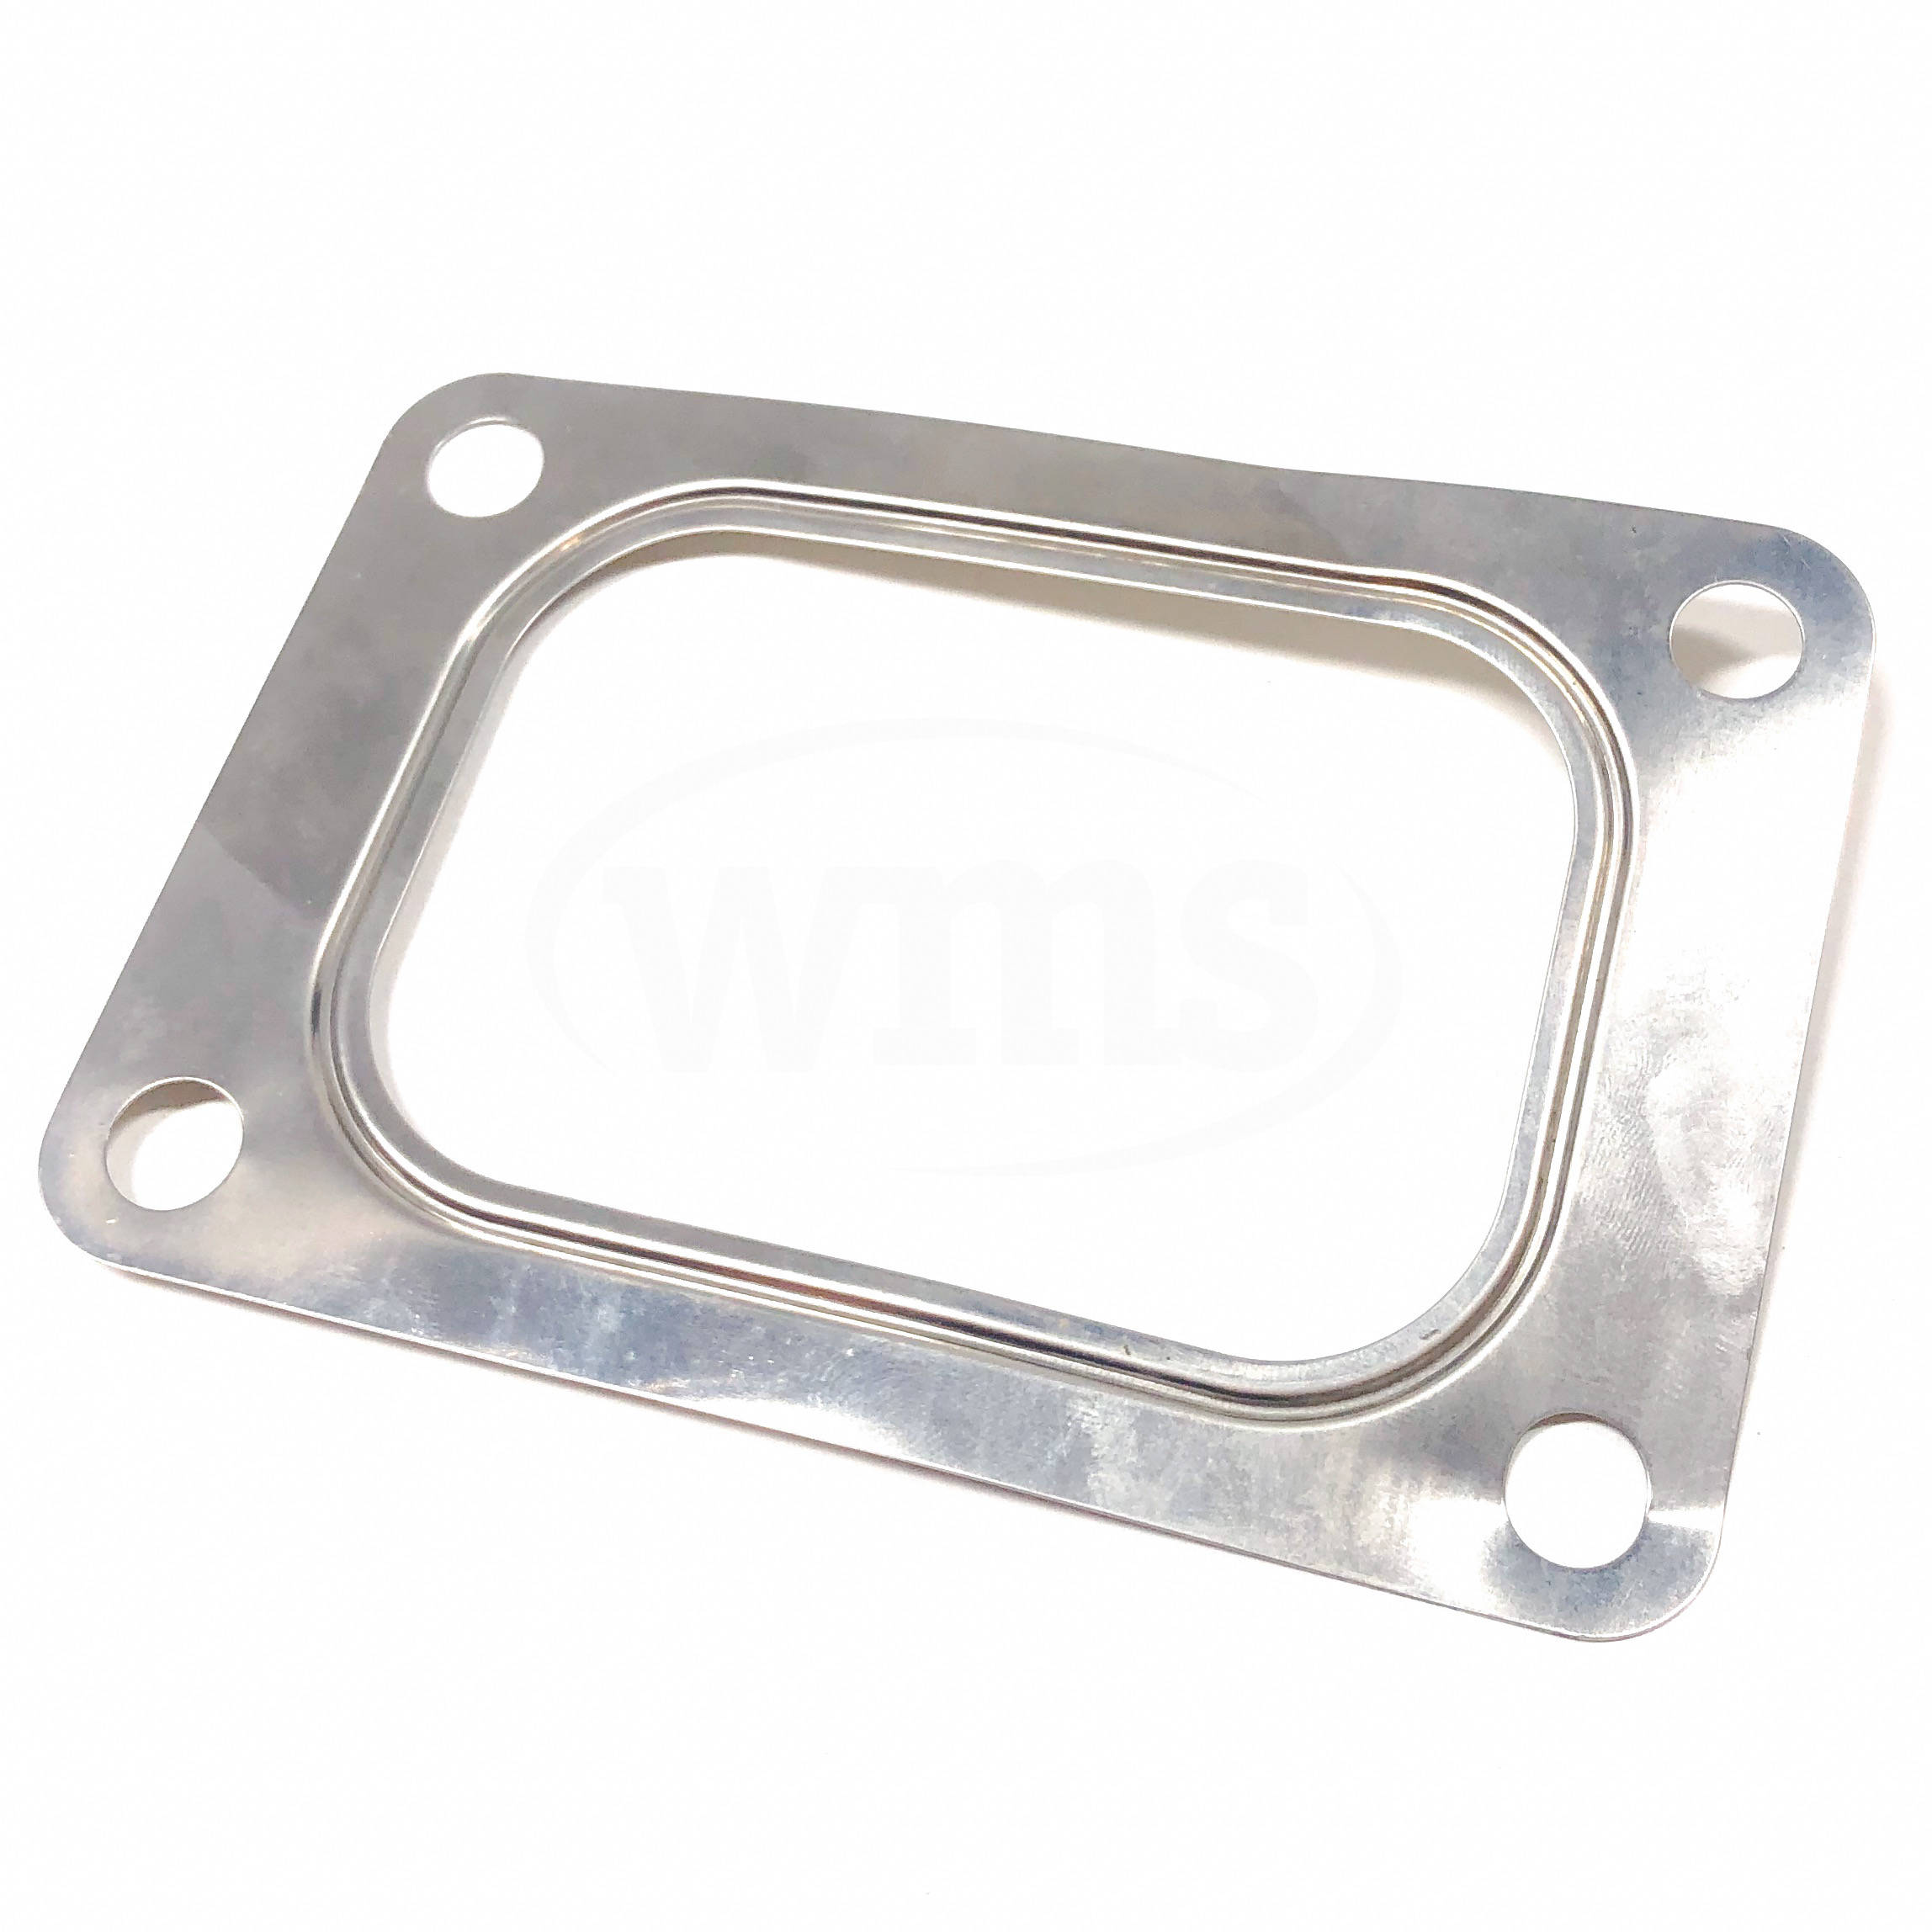 504341103 Case New Holland Industrial (CNH) Manifold Gasket 3